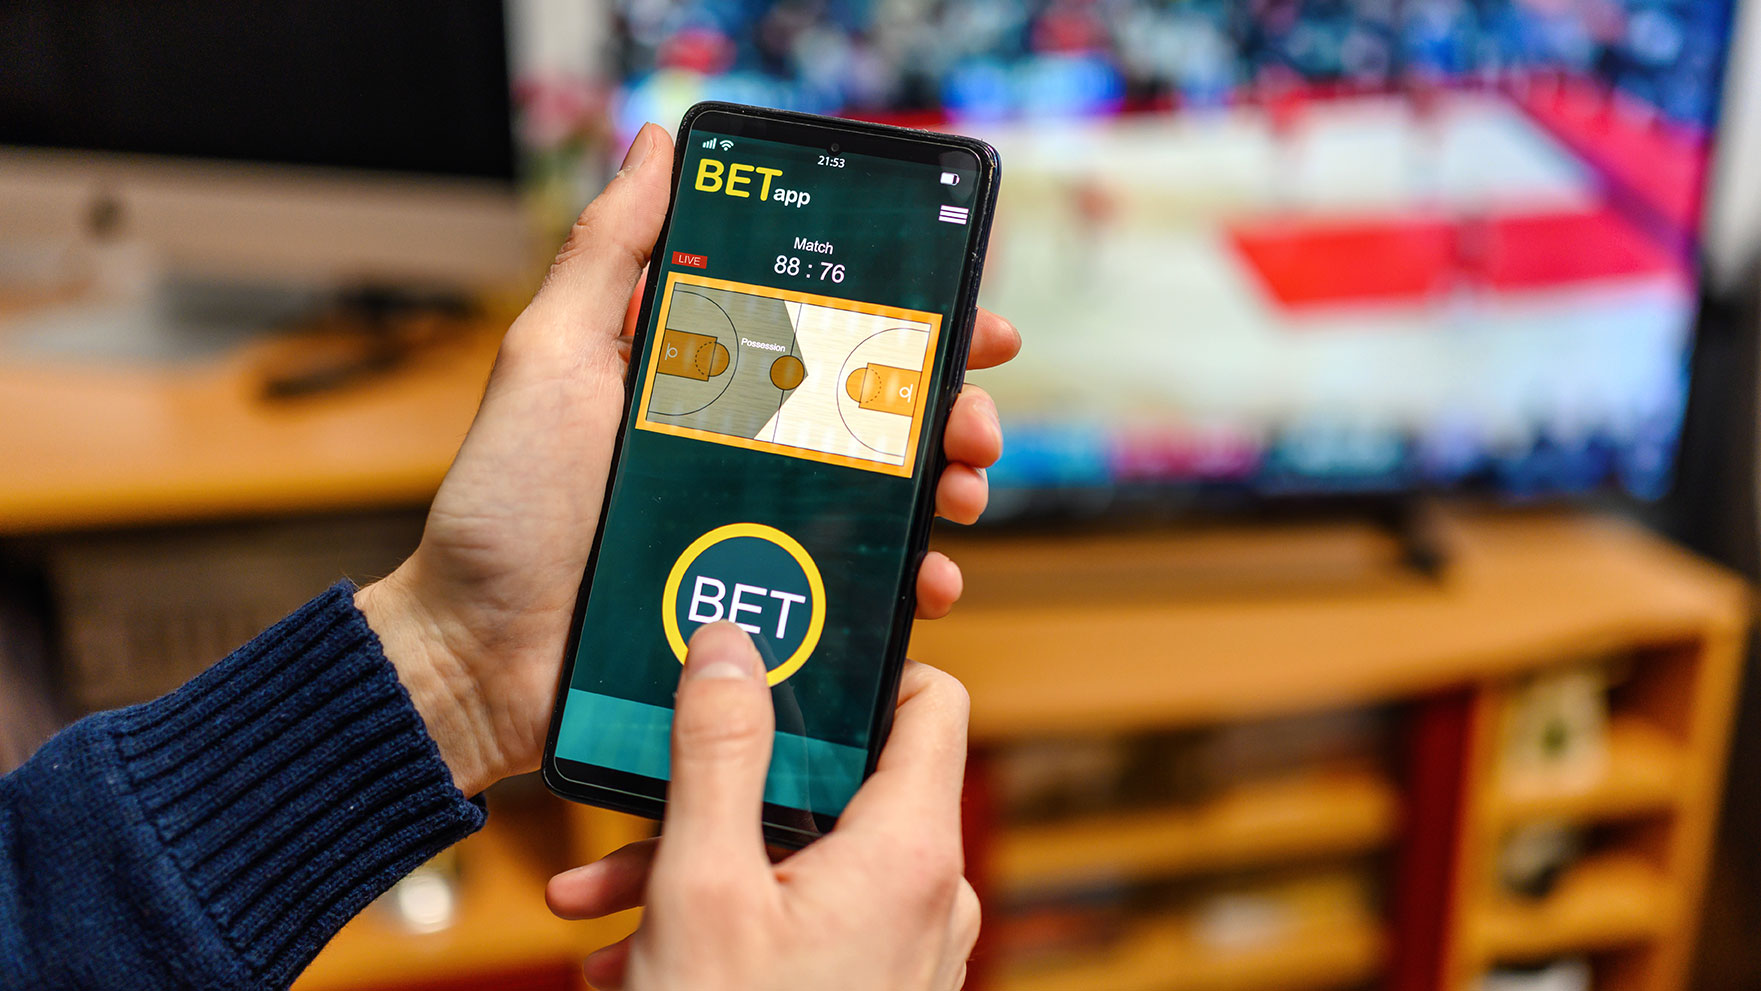 Don’t go mad this March over gambling. Understand the risks of online sportsbooks.